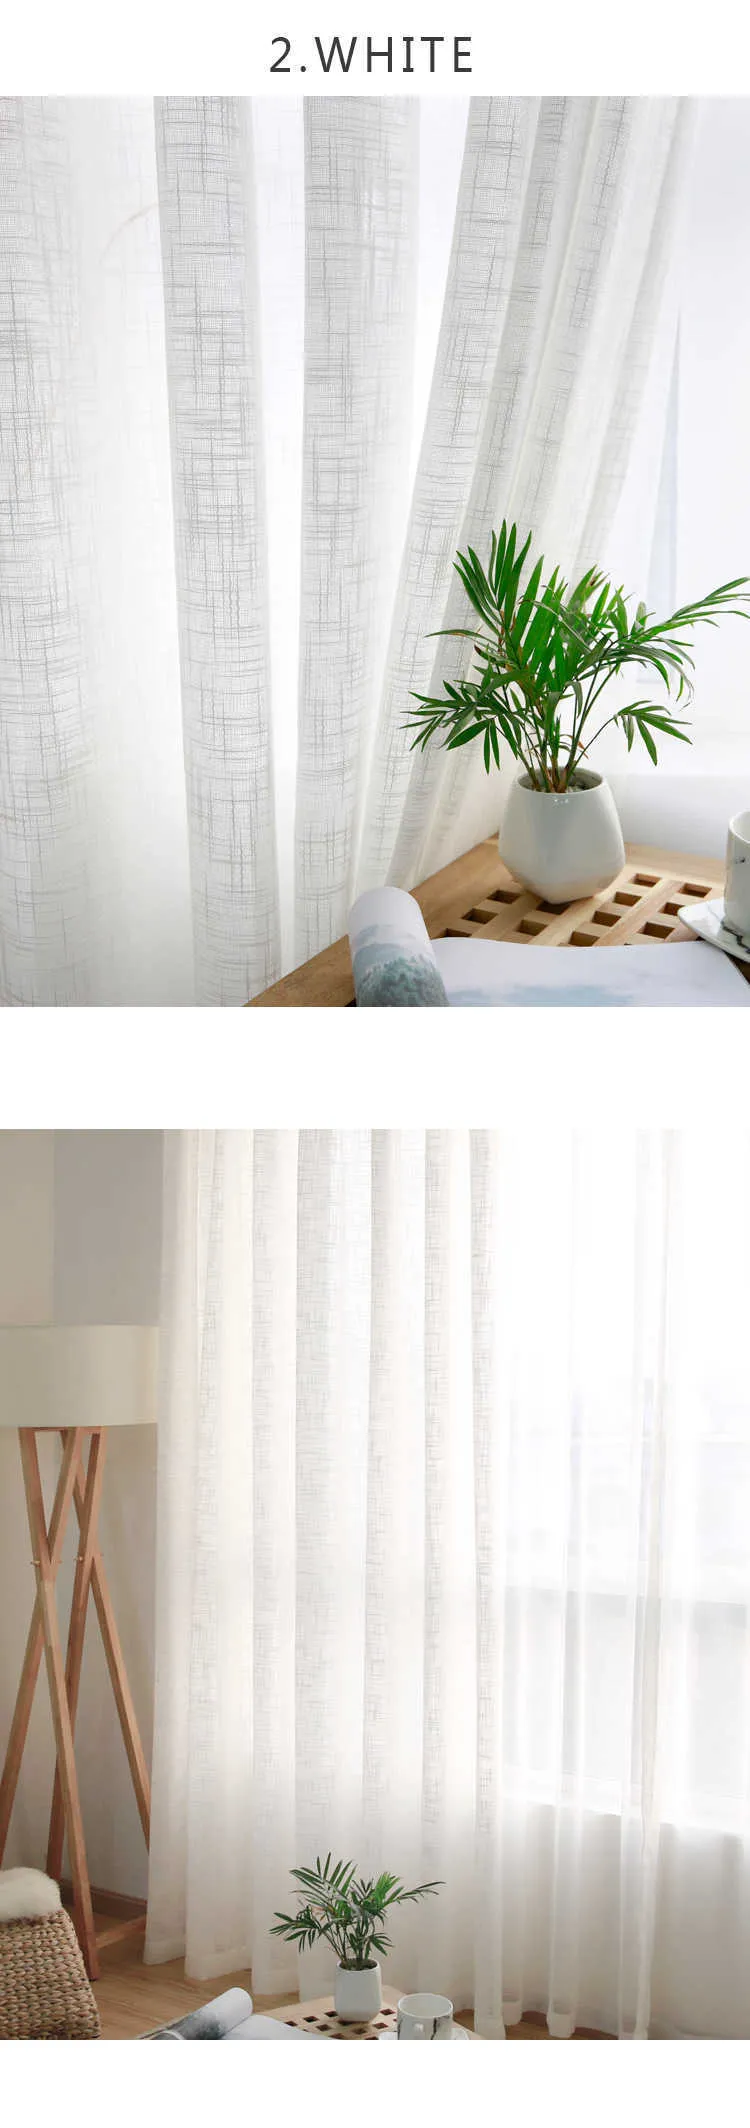 CITYINCITY Tulle American Curtains for Living room Soft White Voile solid Rural Tulle Curtain for bedroom ready made curtain08